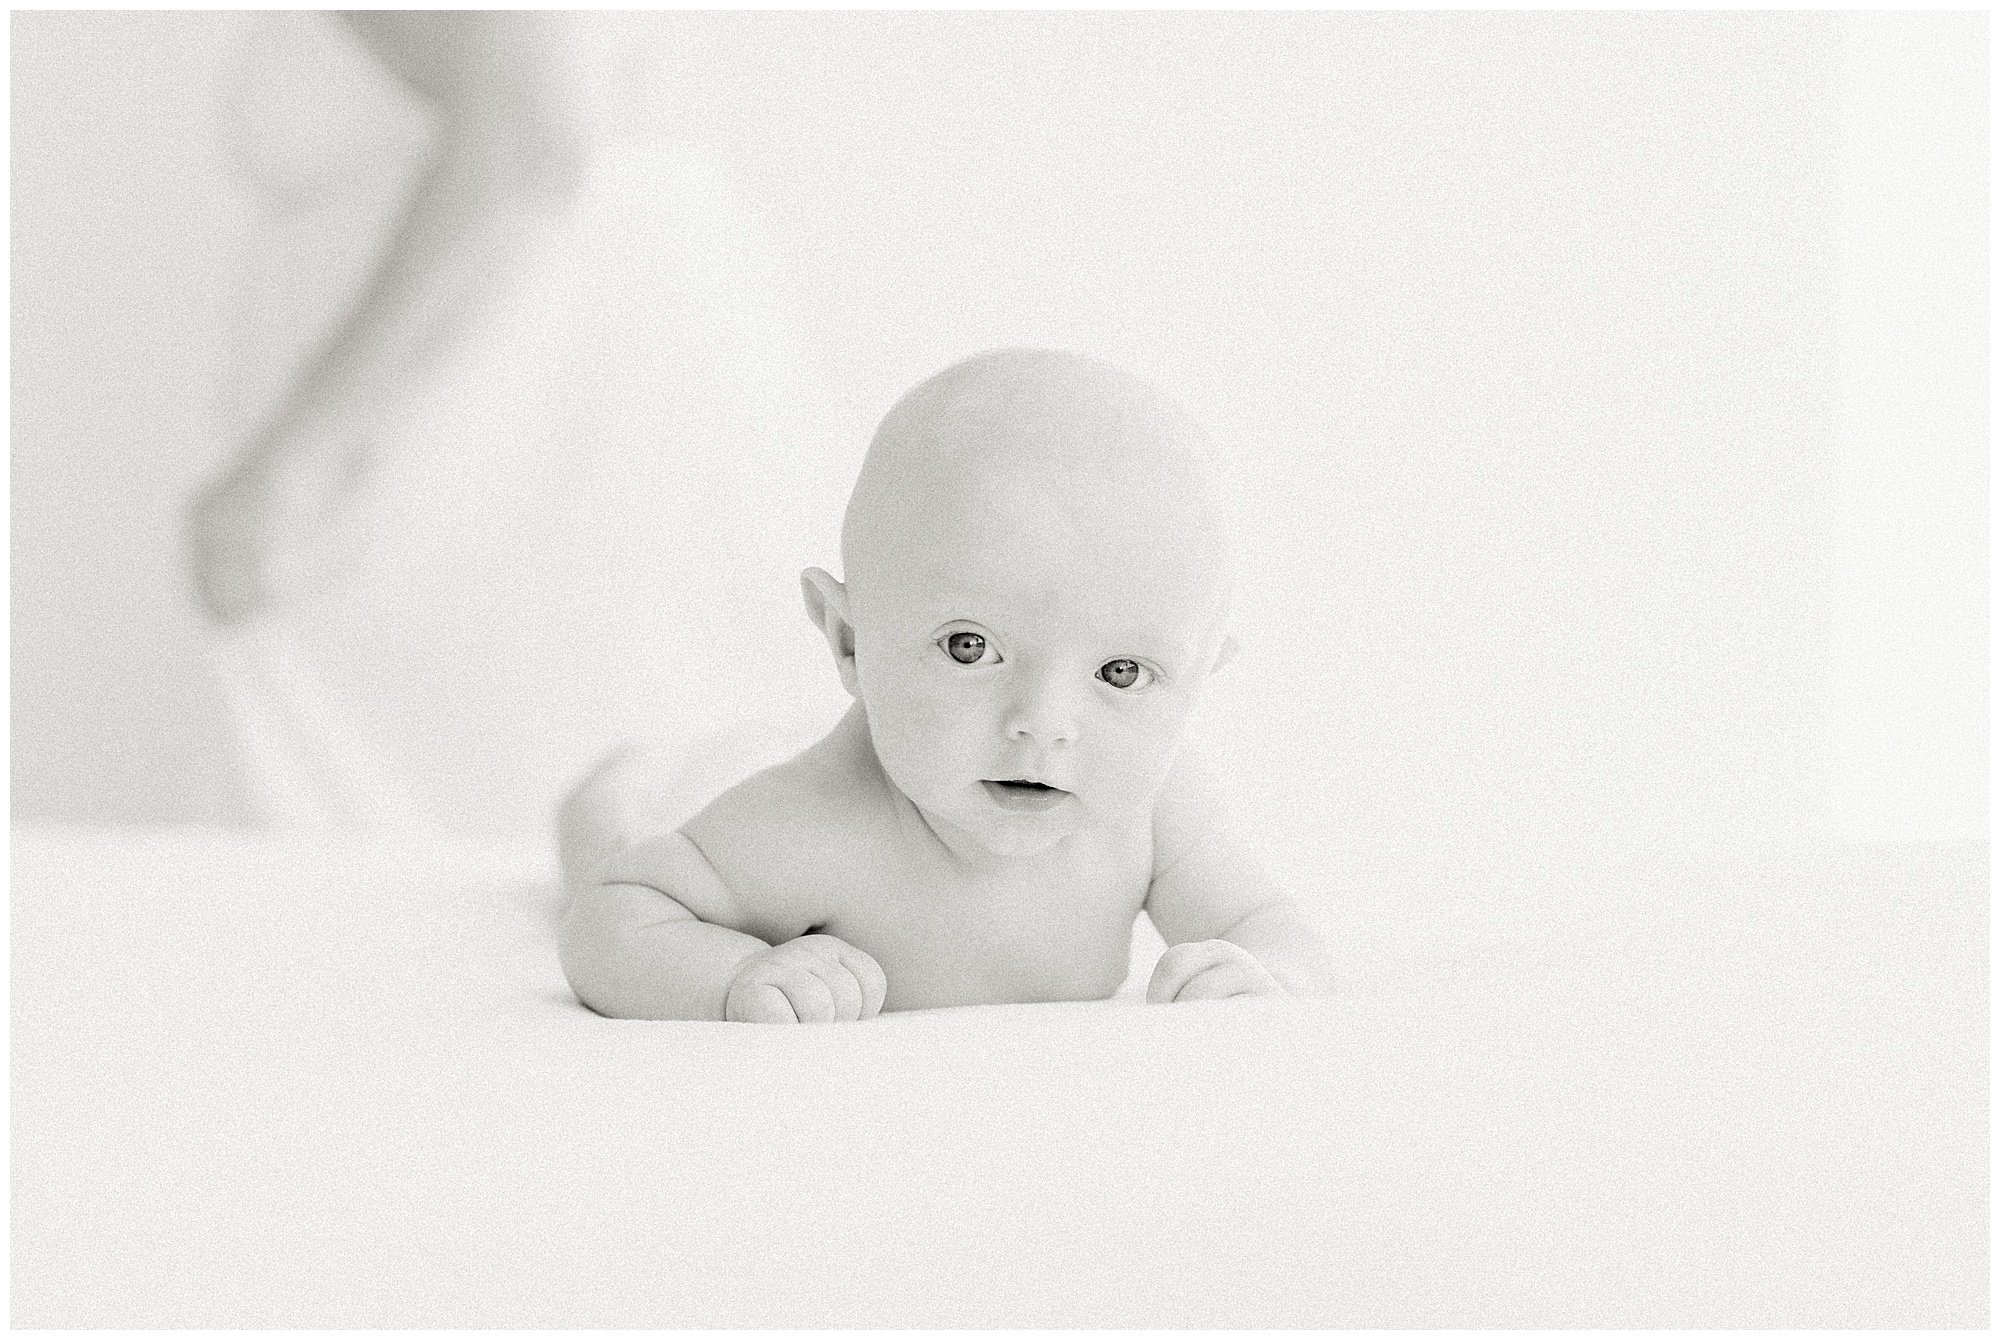 light-and-airy-baby-photography.jpg